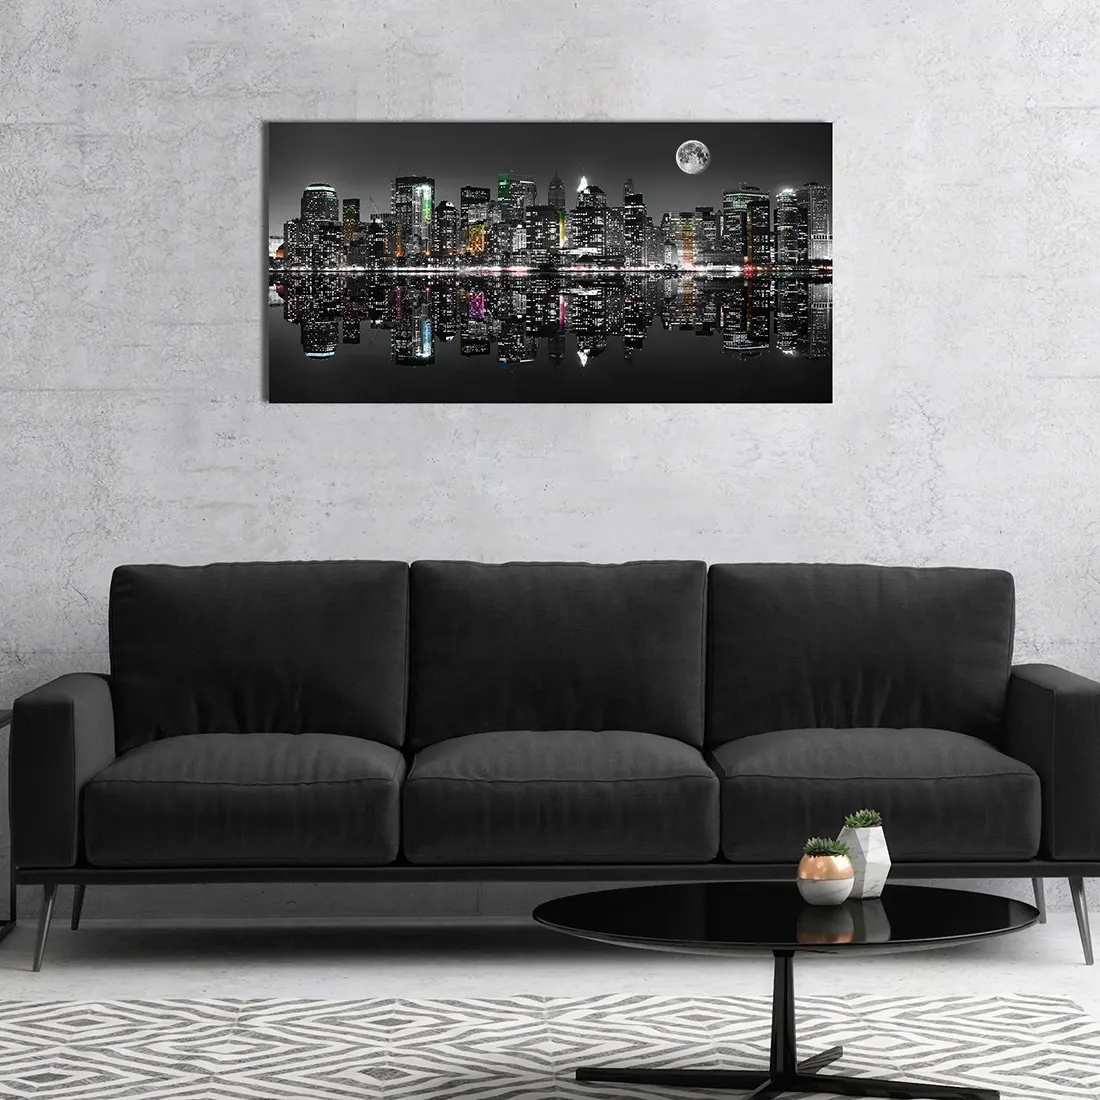 New York City Night View Wall Art For Living Room Bedroom Oil Paintings on Canvas